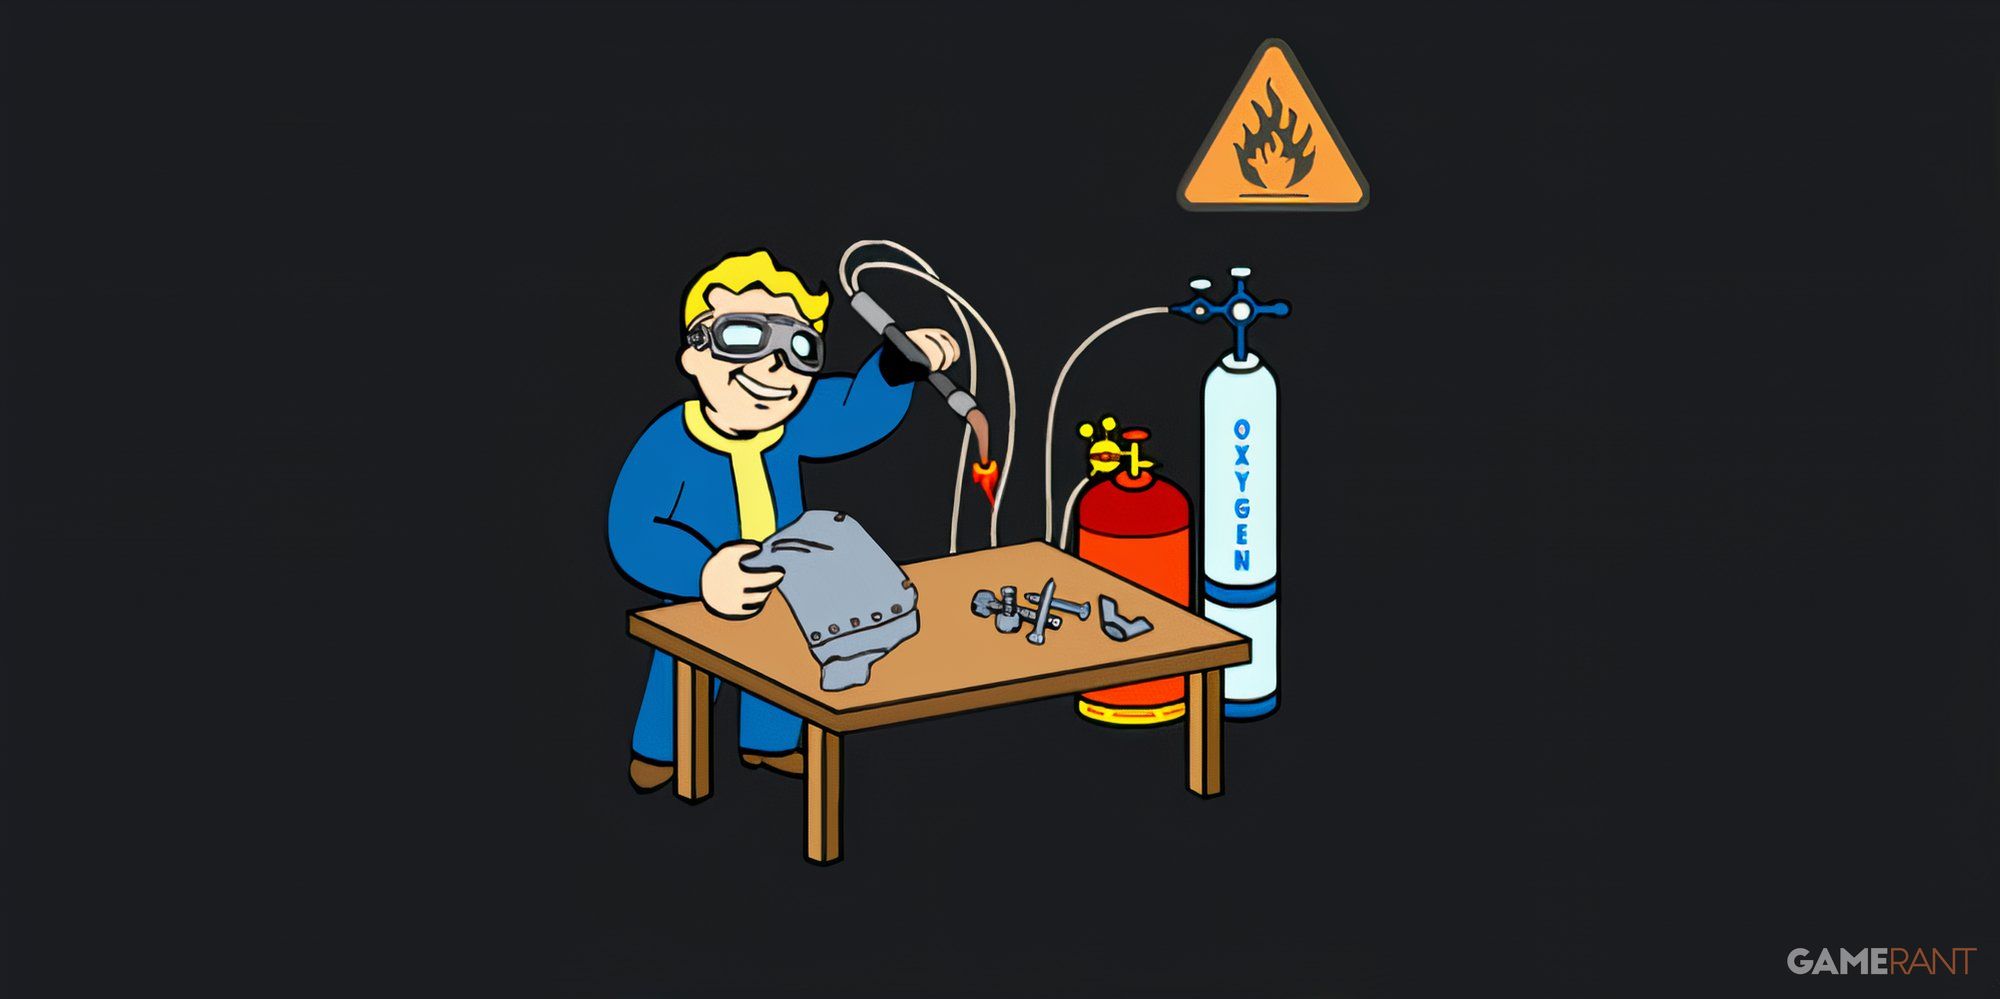 Vault Boy stands at an armor workbench with welding goggles and holds a welding torch